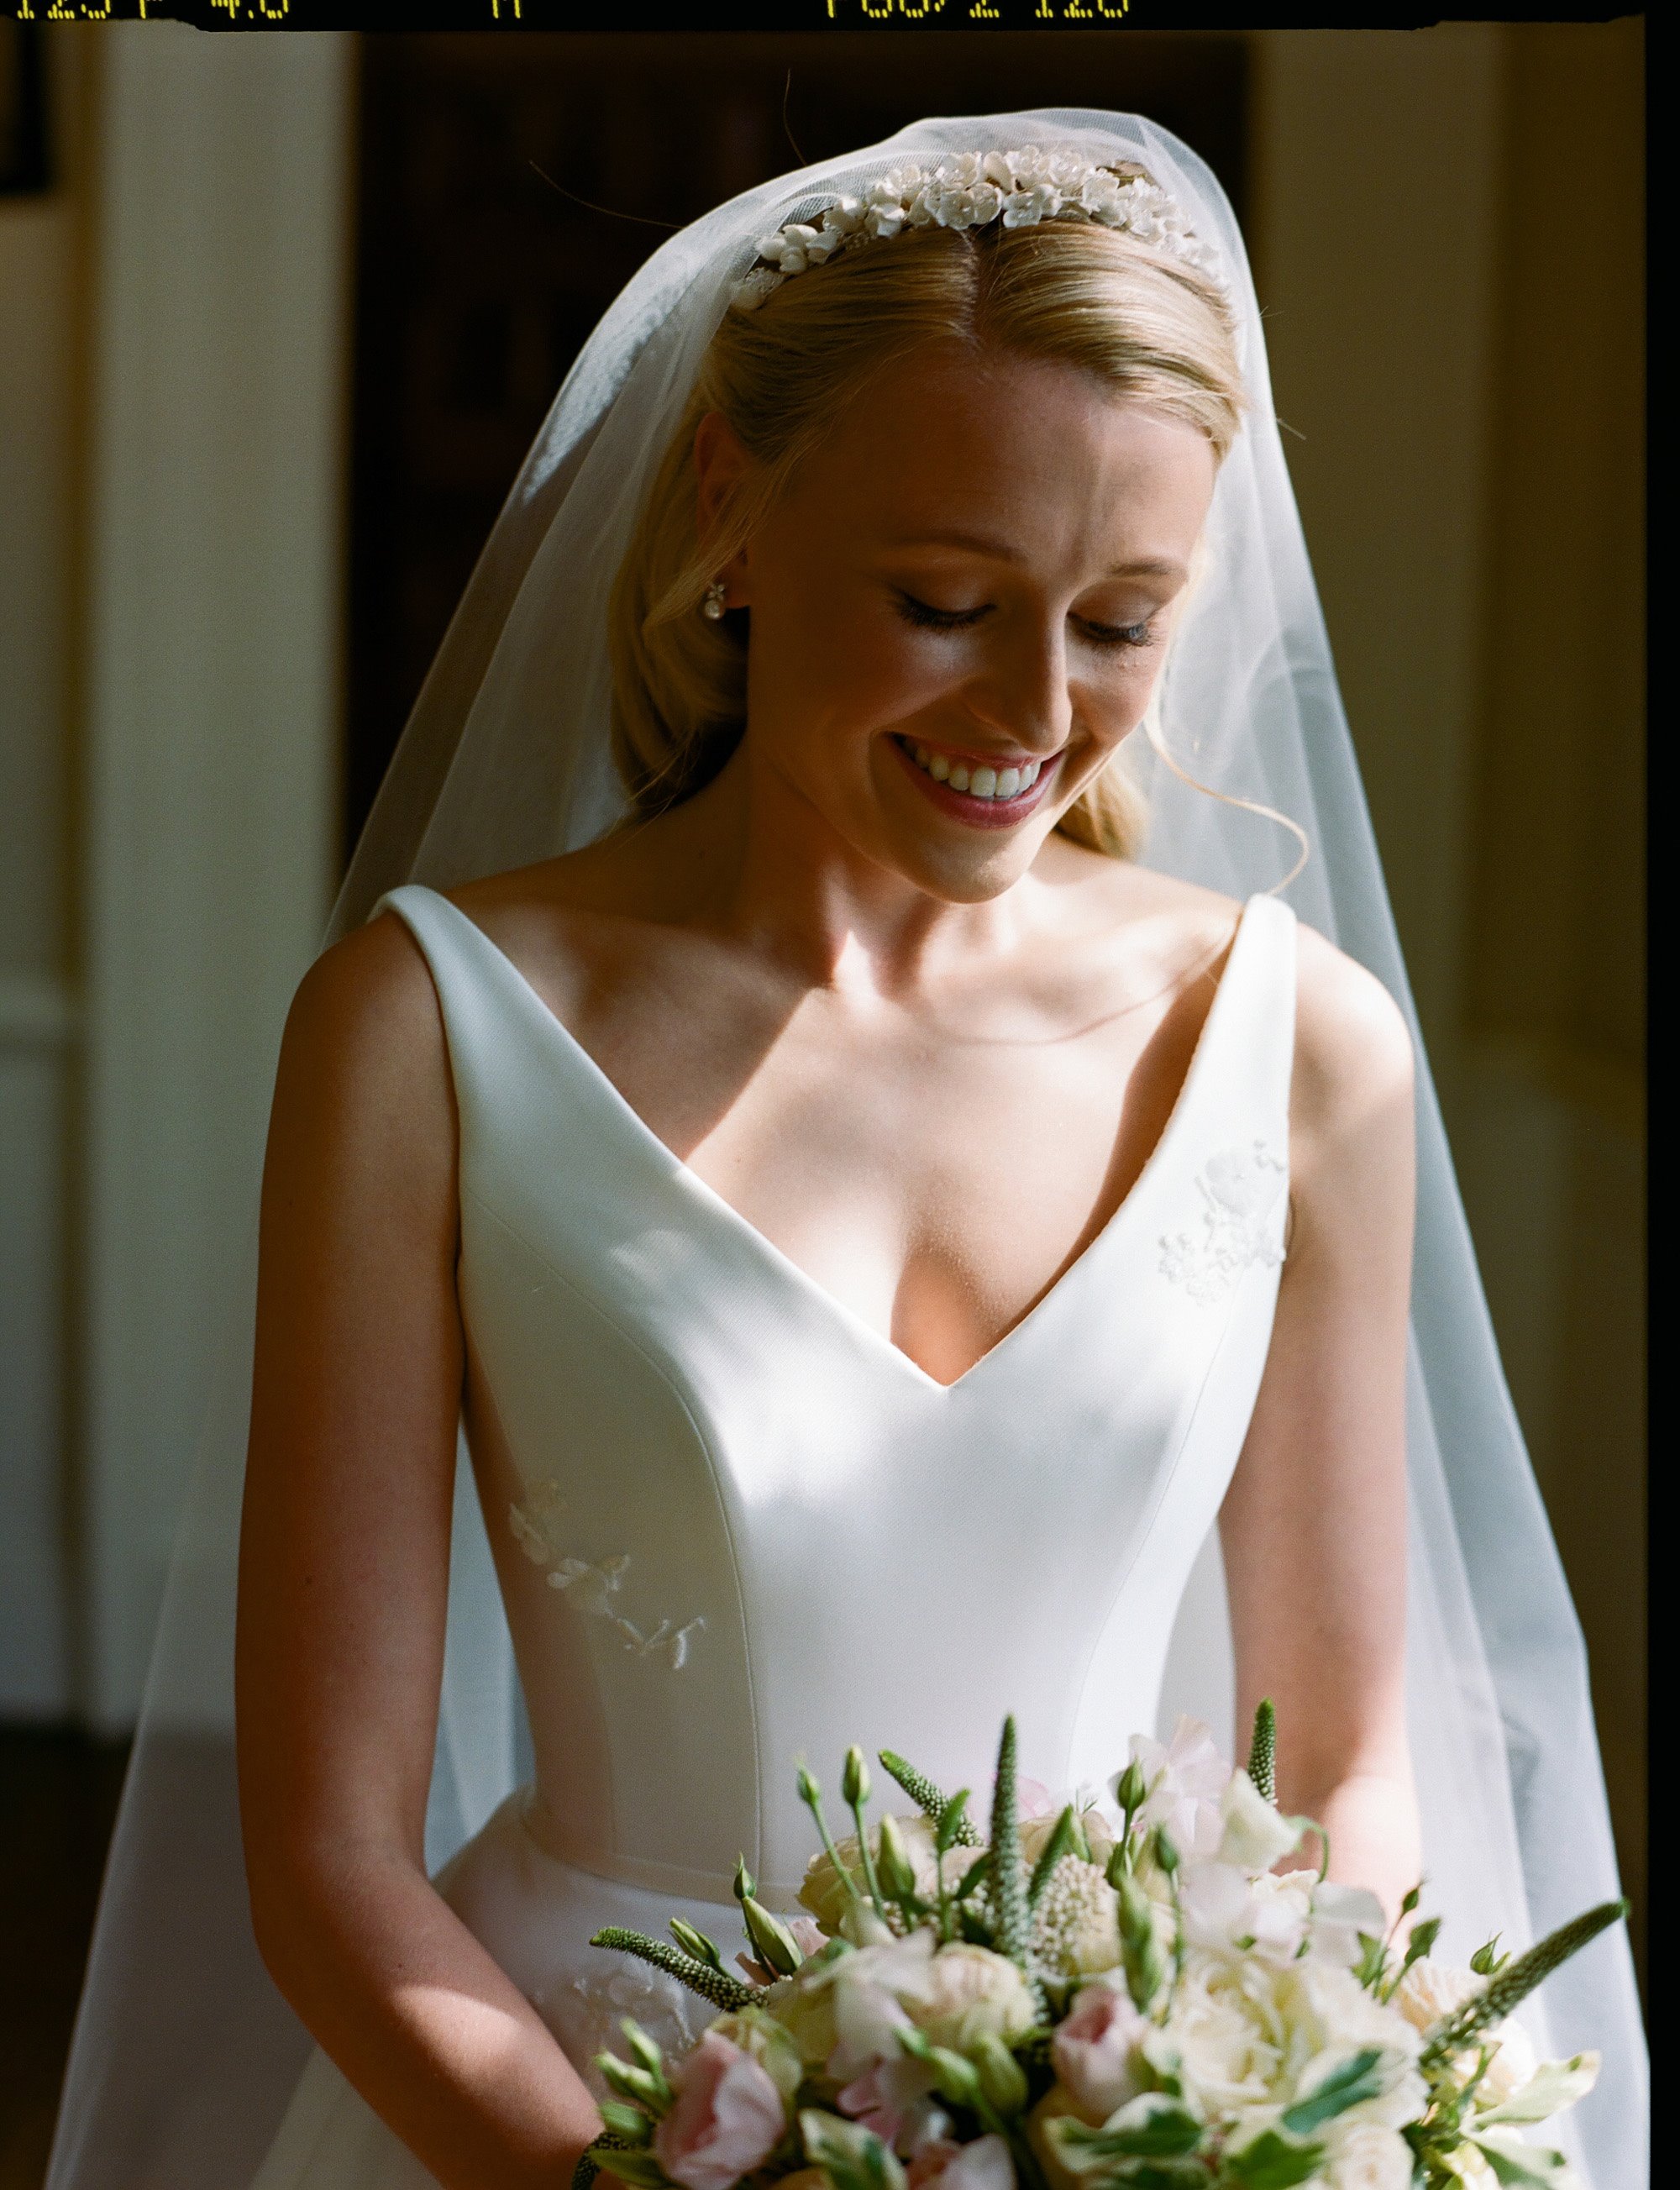 Demure and elegant bride in chic simple satin wedding gown, pearl tiara and veil, pearl necklace and pearl earrings smiles down at her bouquet of white, pale pink and green flowers